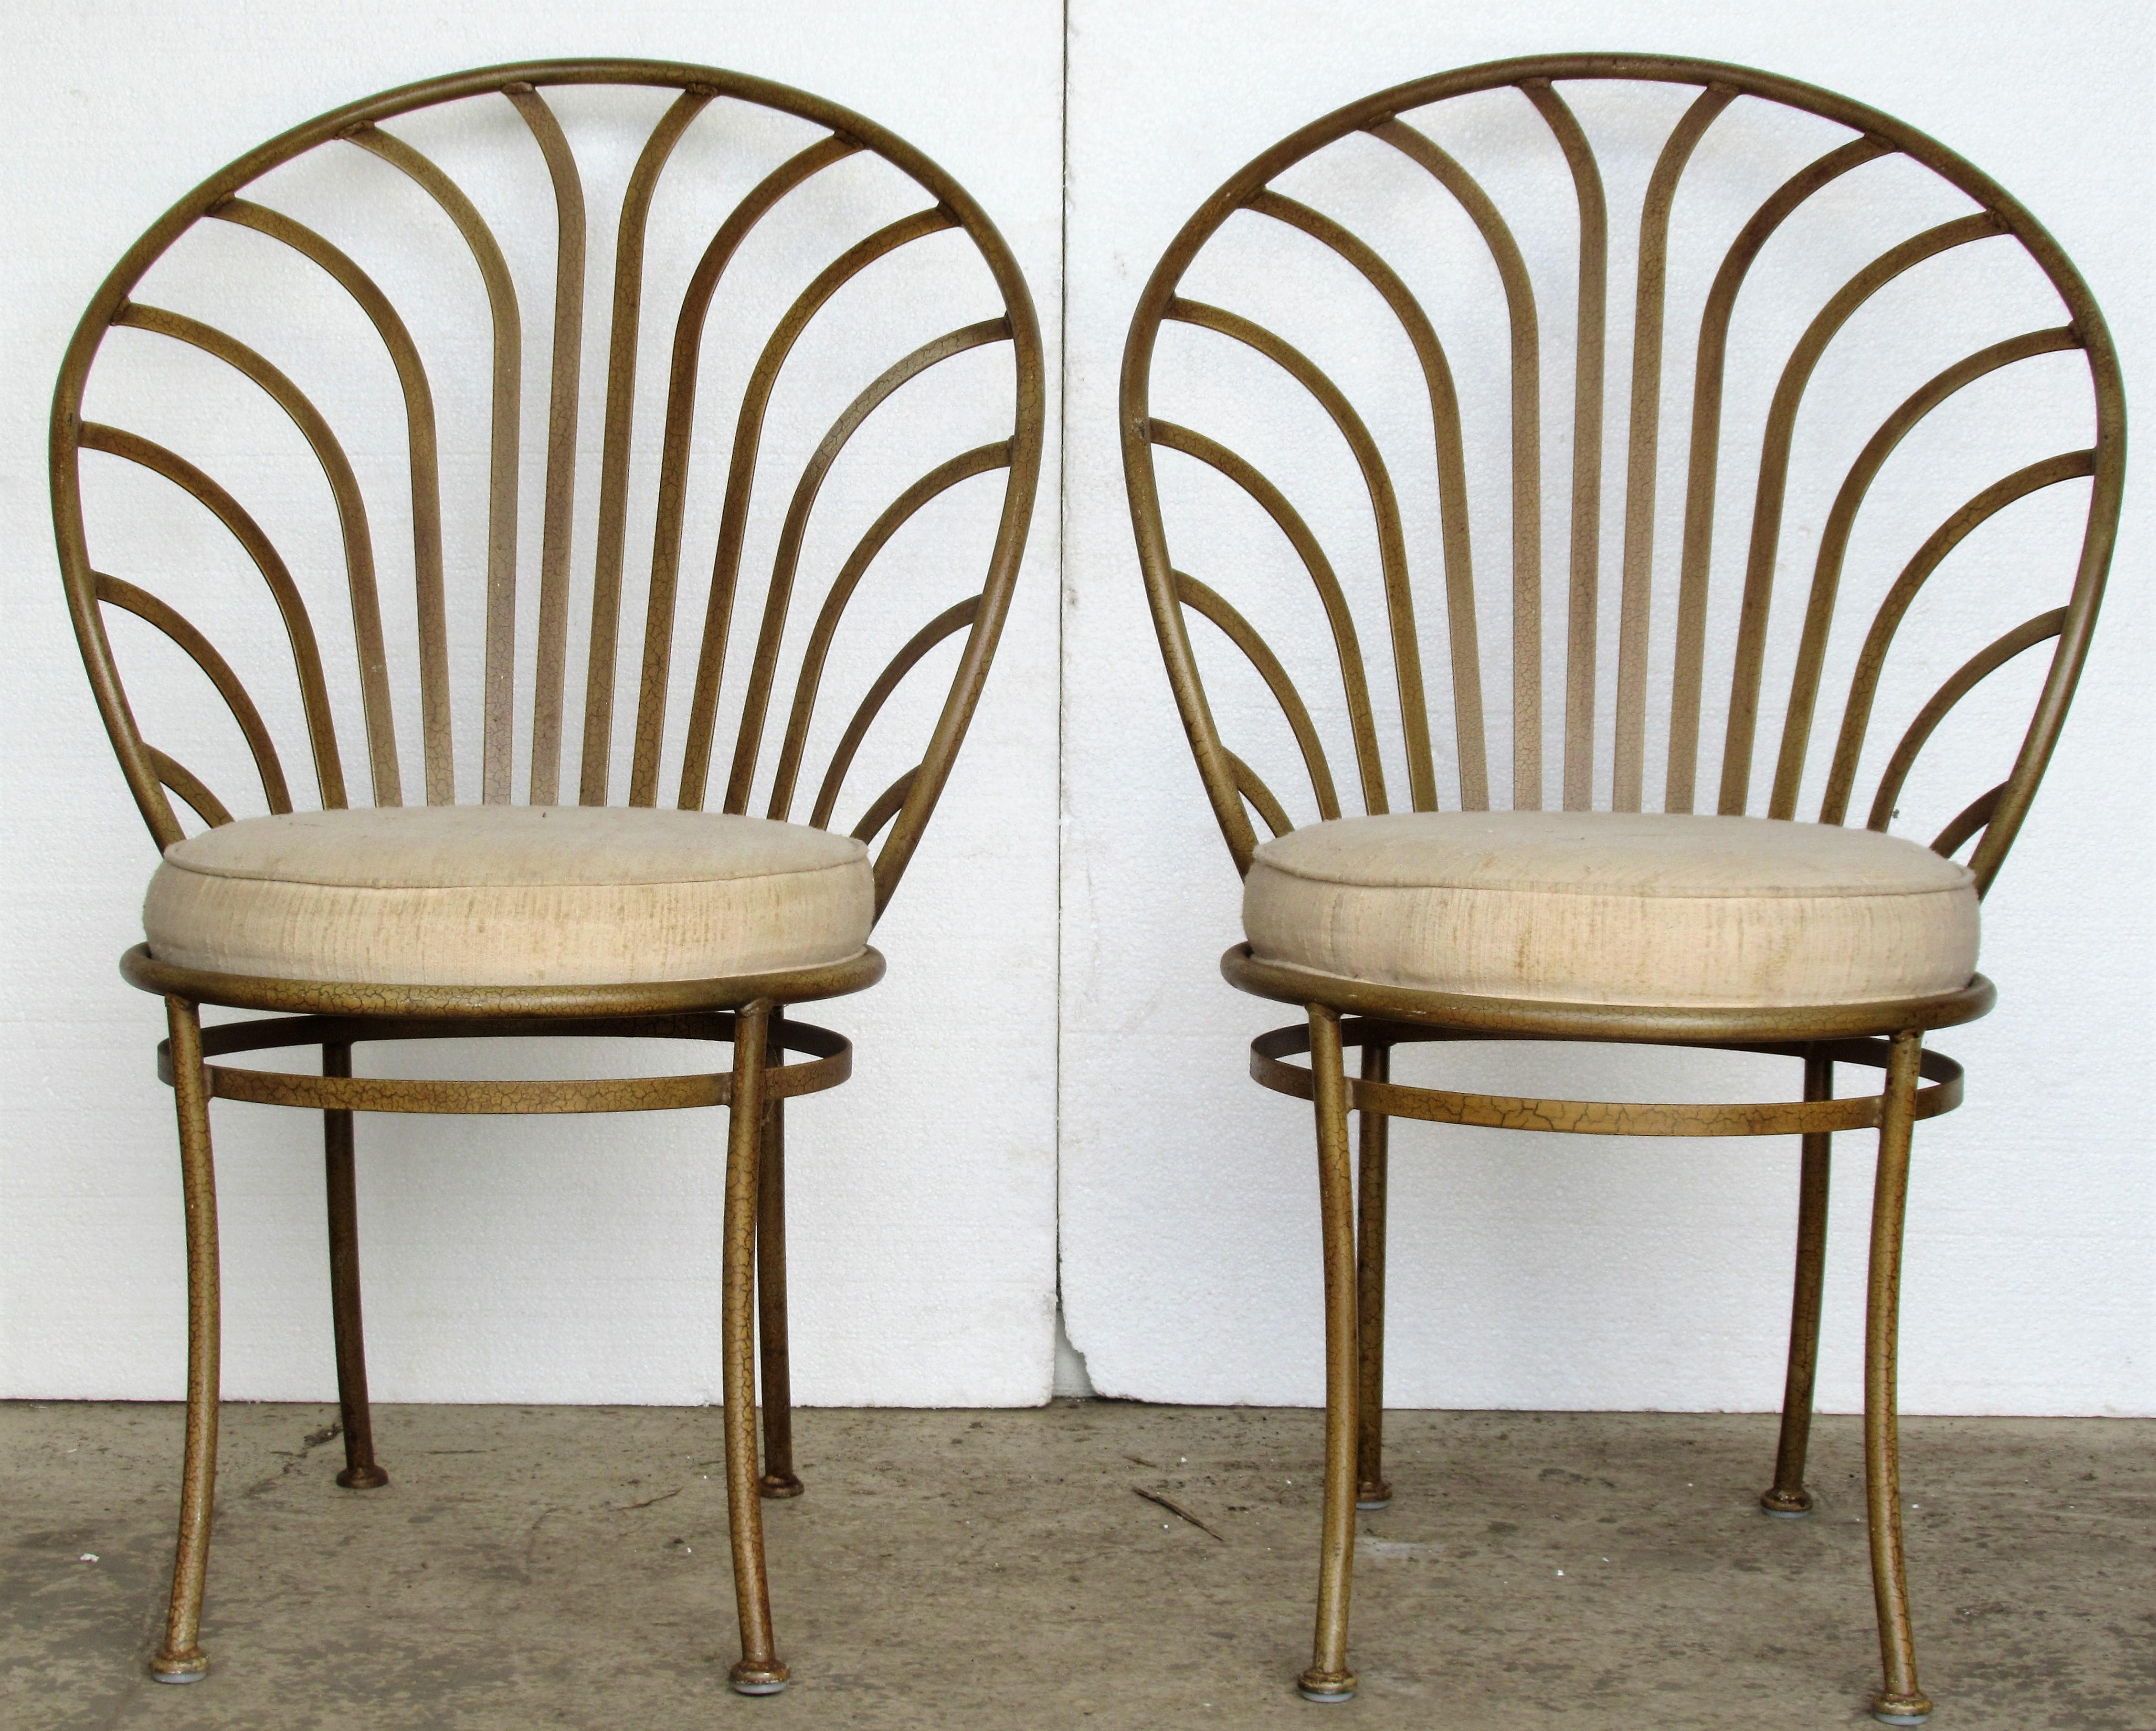 A set of four steel French Art Deco style sculptural scallop back chairs designed by Arthur Umanoff for Shaver Howard with vintage upholstered seats and beautifully aged bronzed gold alligatored painted finish, circa 1970. Look at all pictures and